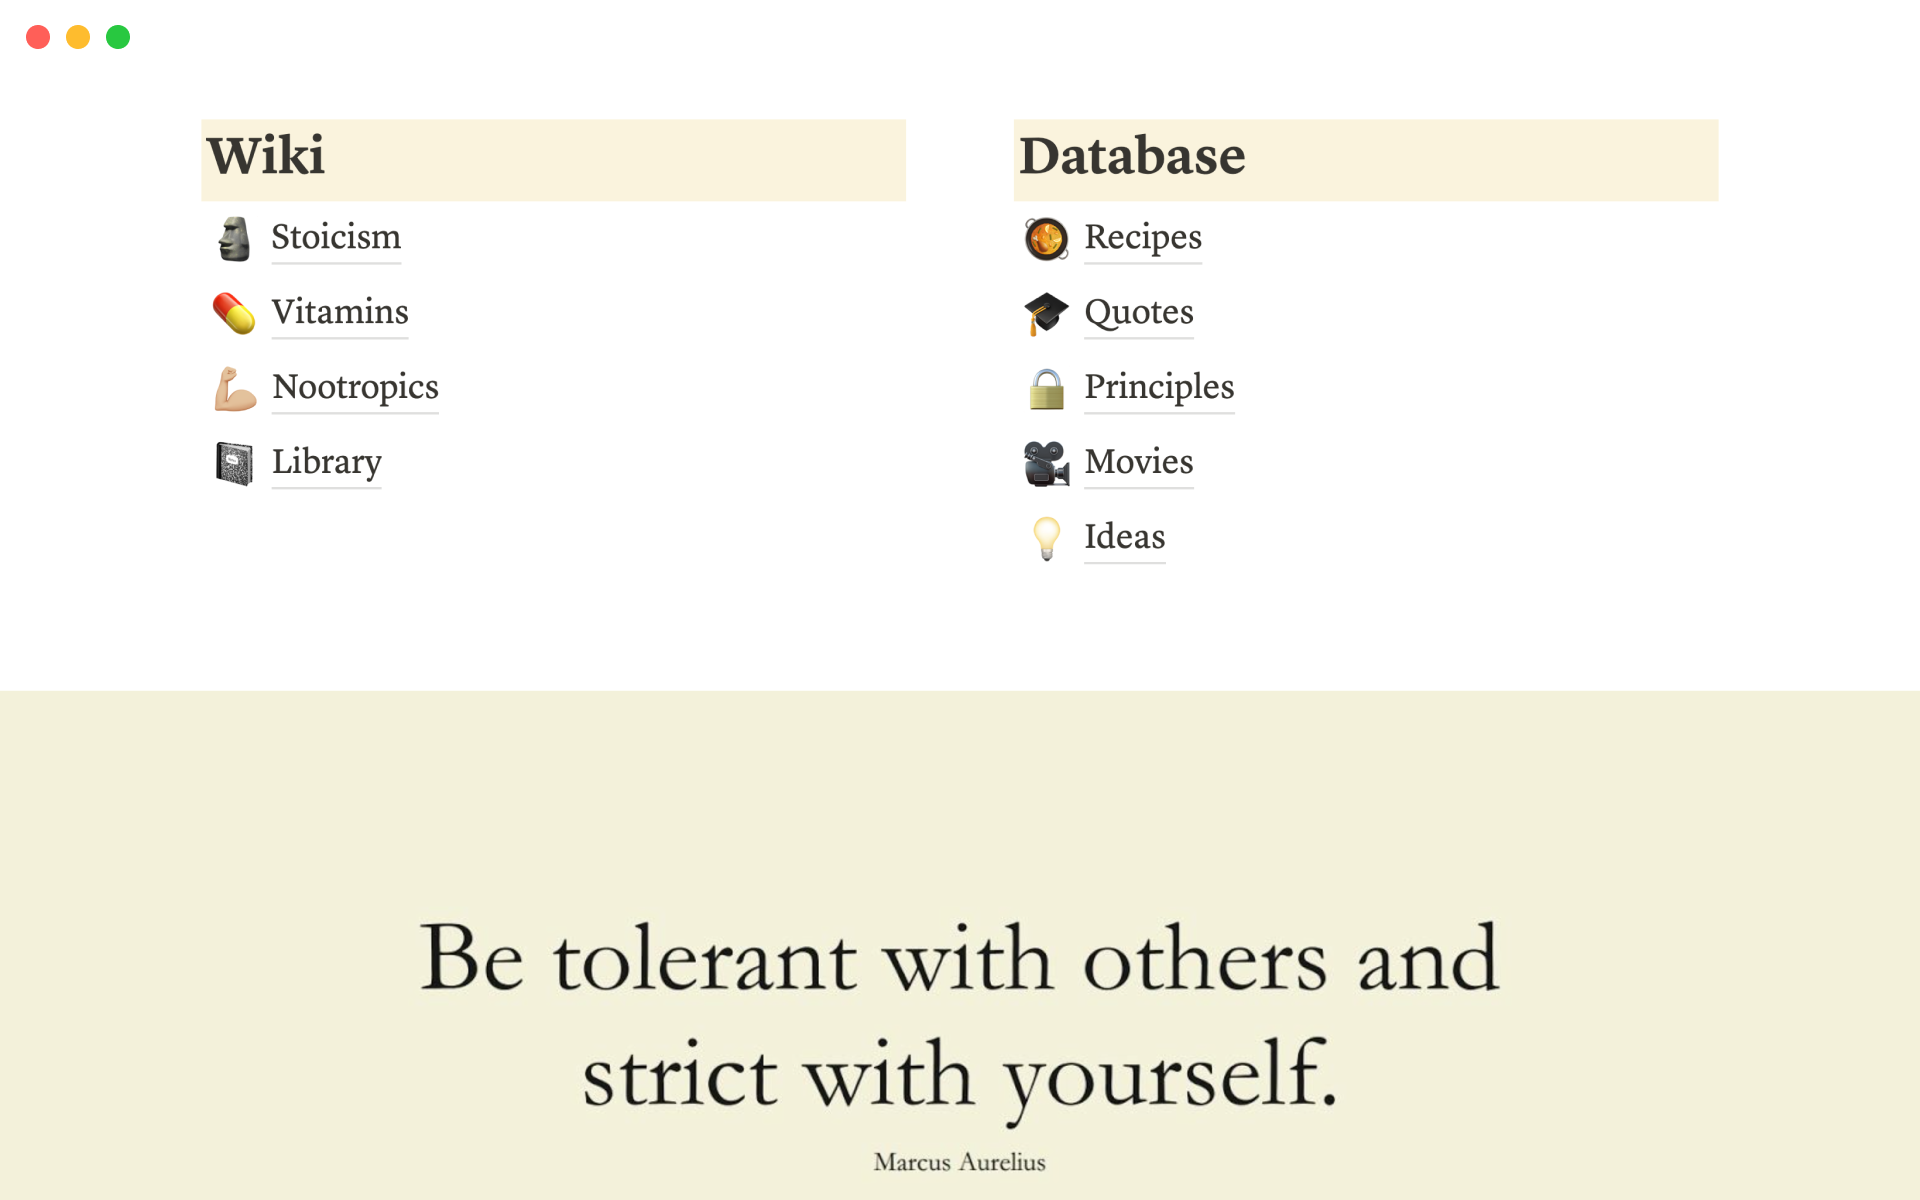 Manage your entire life as a stoic from one place, digitally.